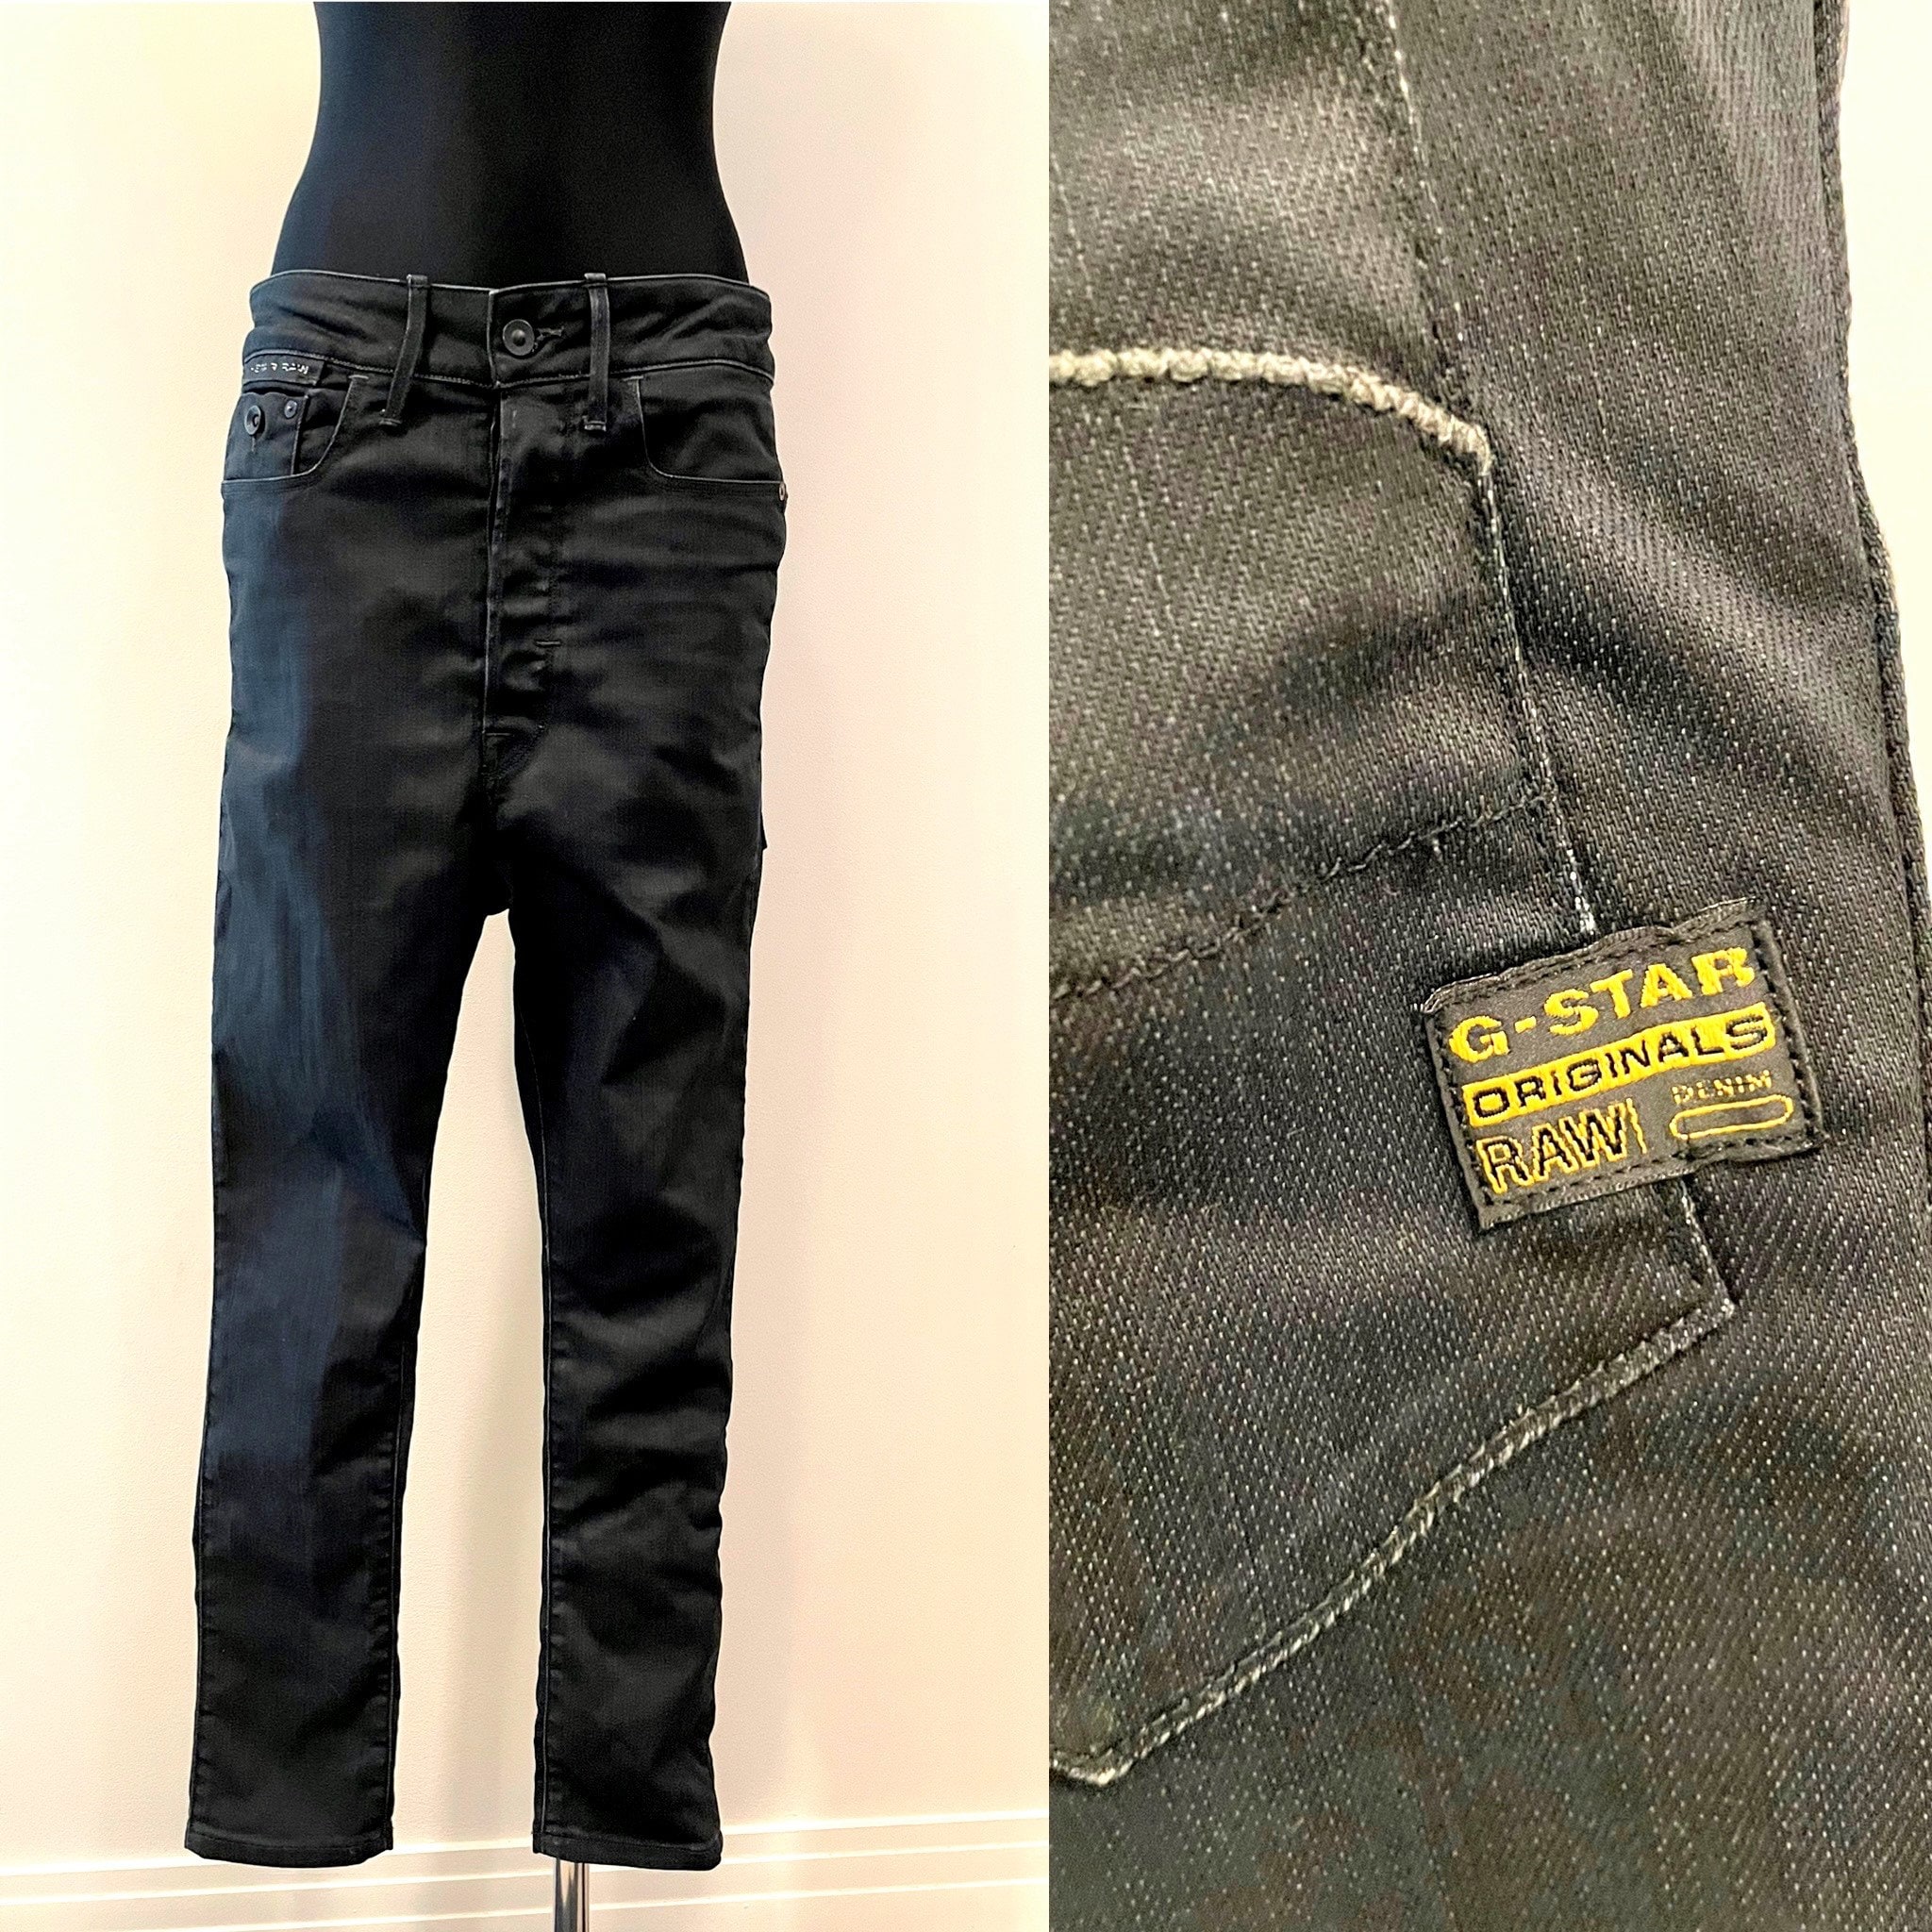 baggy jeans g star,OFF 64%,www.concordehotels.com.tr